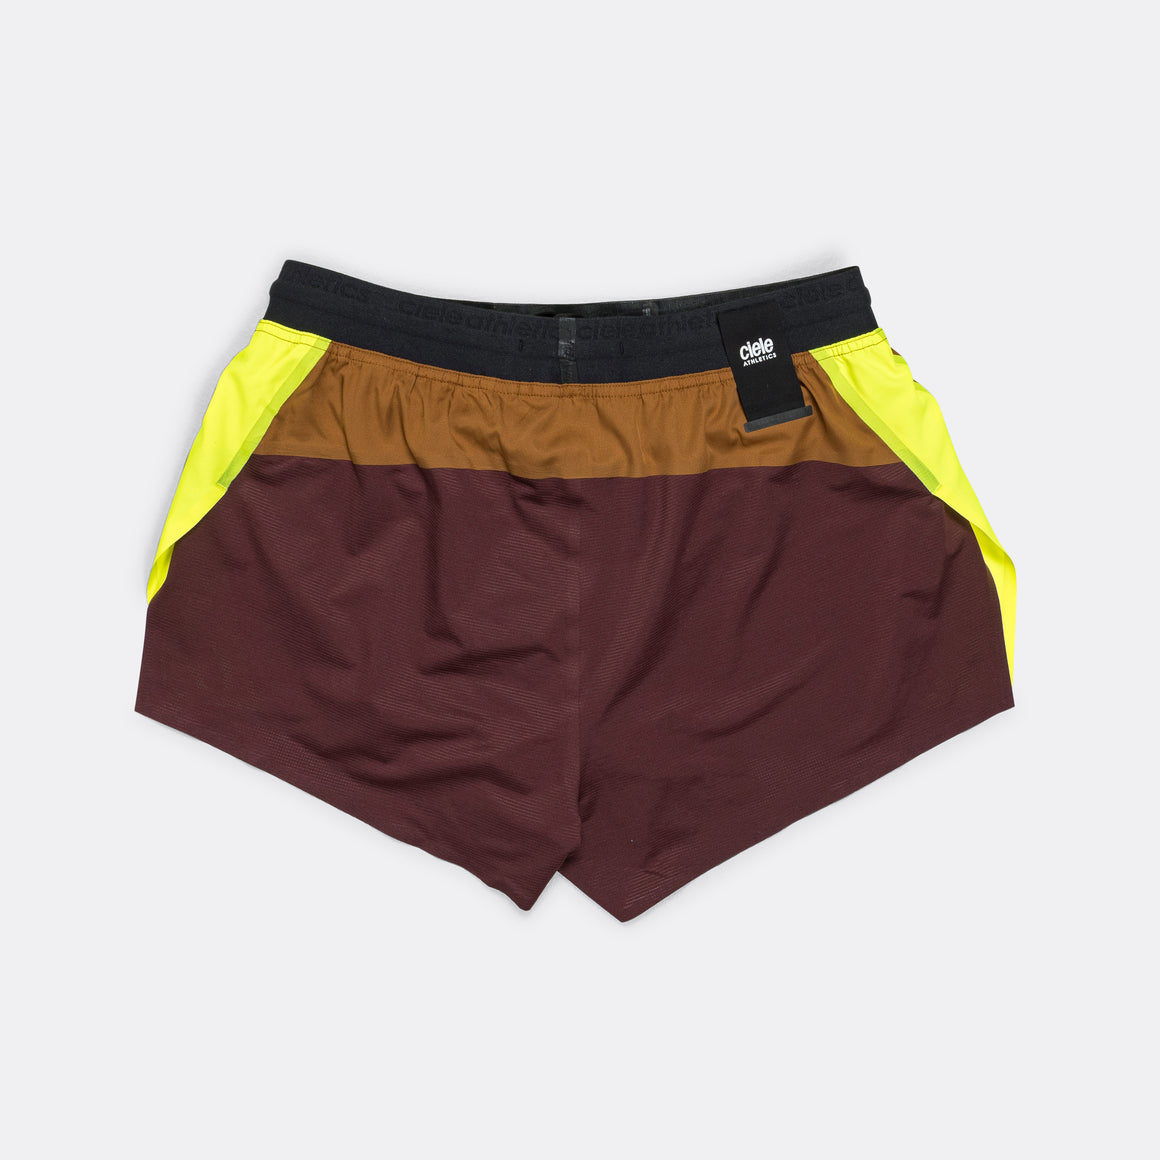 Ciele - Mens DBSShort Elite - Earthship - Up There Athletics